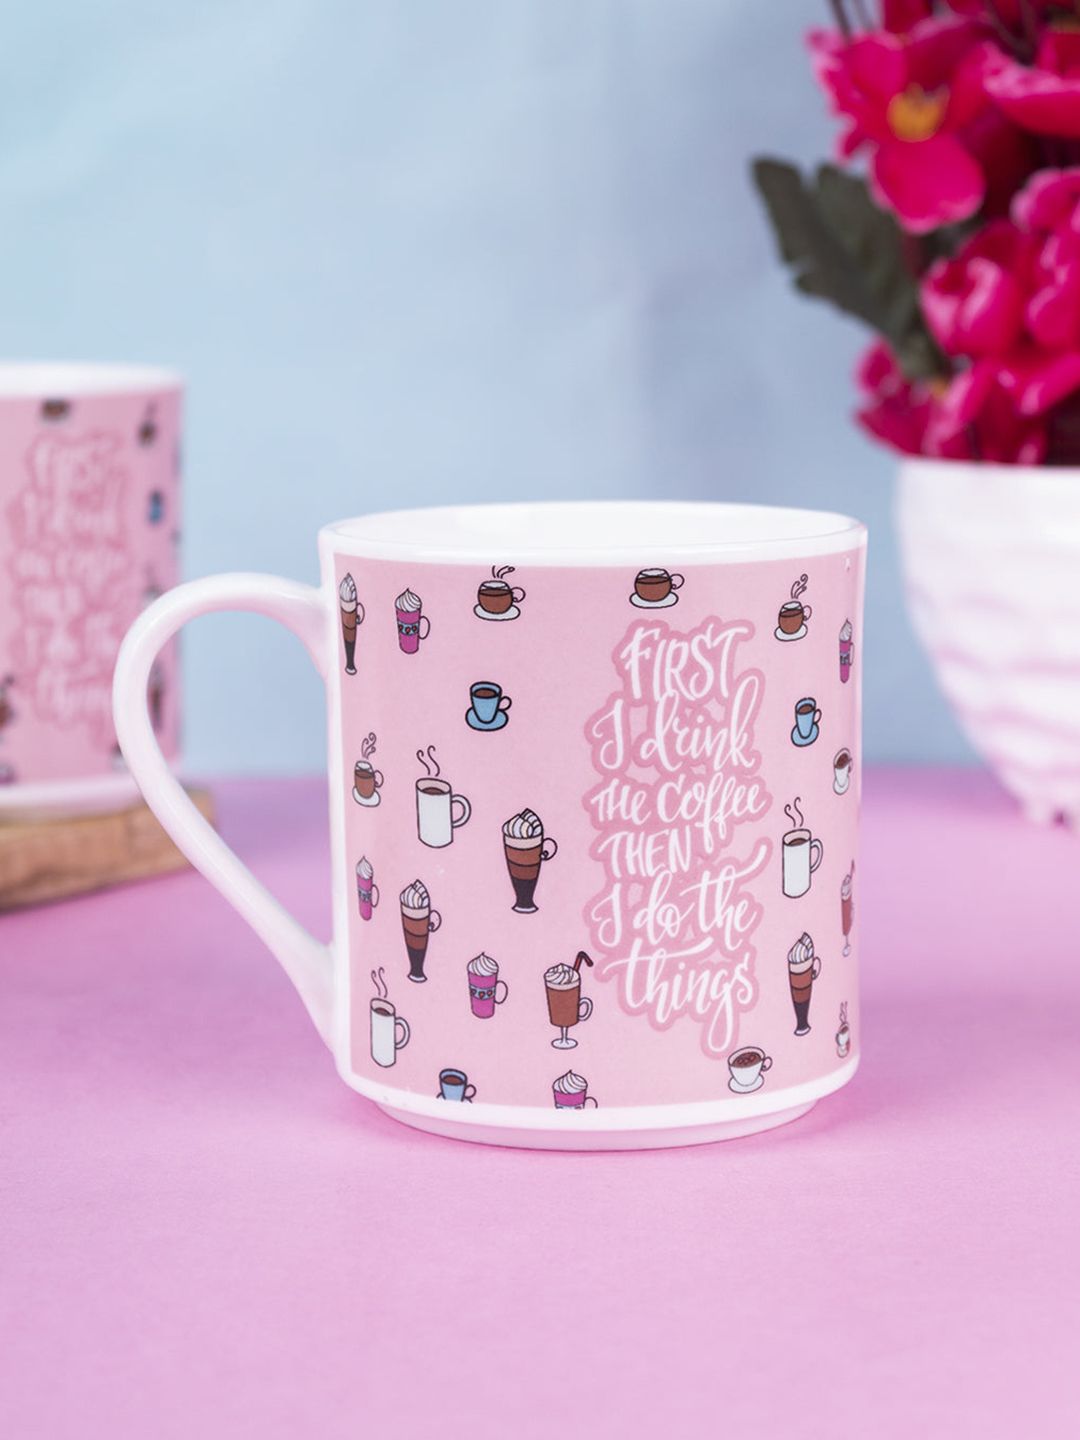 MARKET99 Pink Text or Slogans Printed Ceramic Glossy Mugs Set of Cups and Mugs Price in India